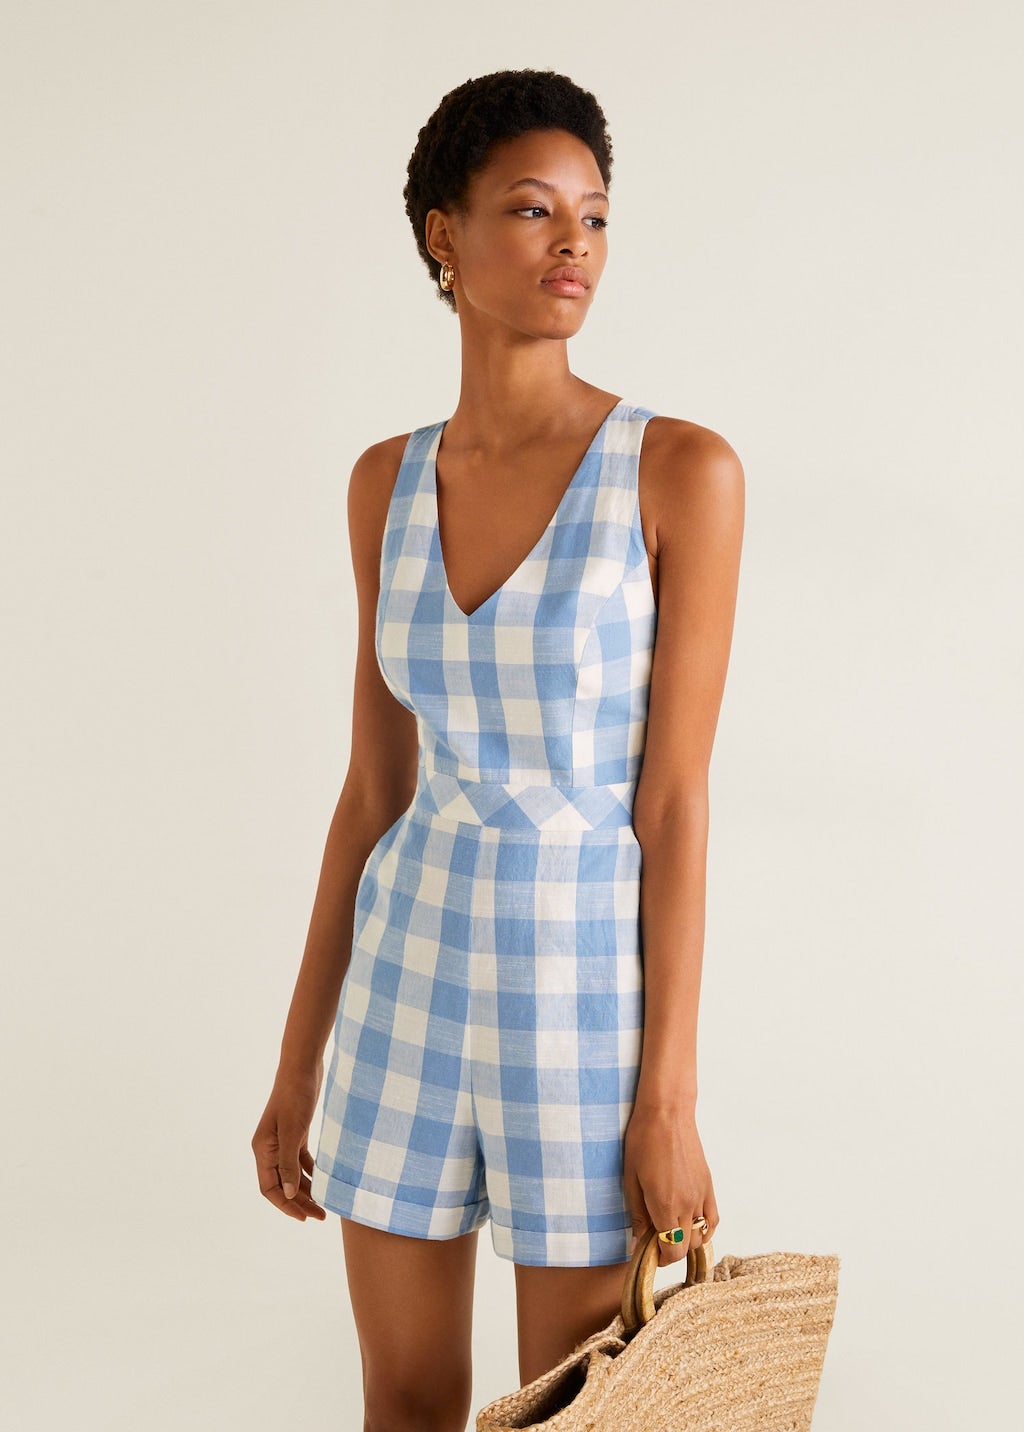 It's The Season of Gingham, These Are The Pieces You Need